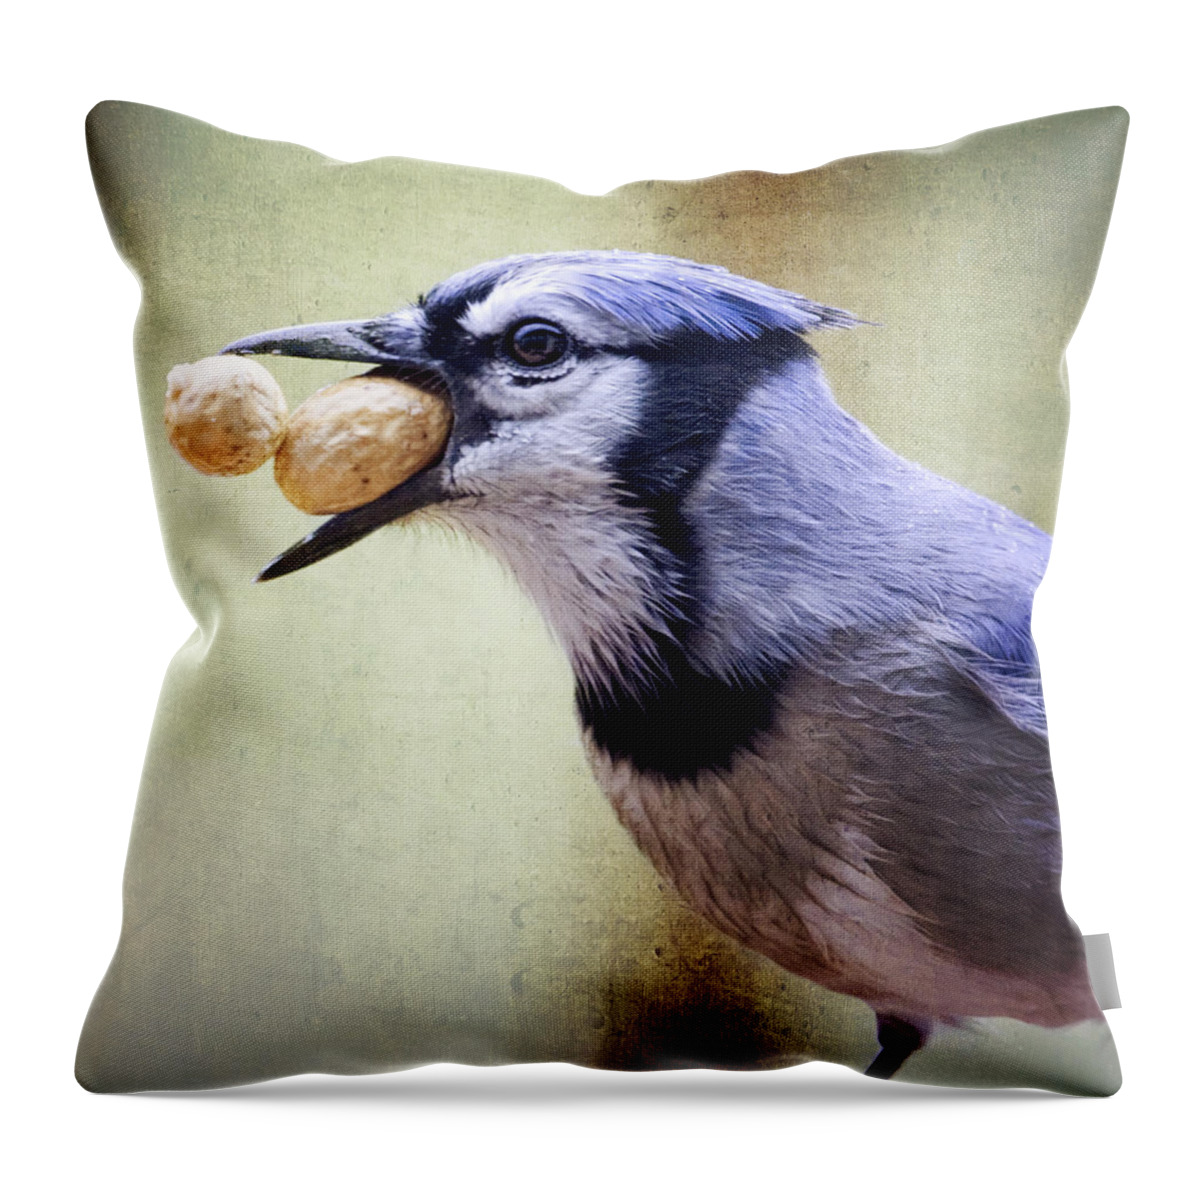 Birds Throw Pillow featuring the photograph Rainy Day Blue Jay by Al Mueller